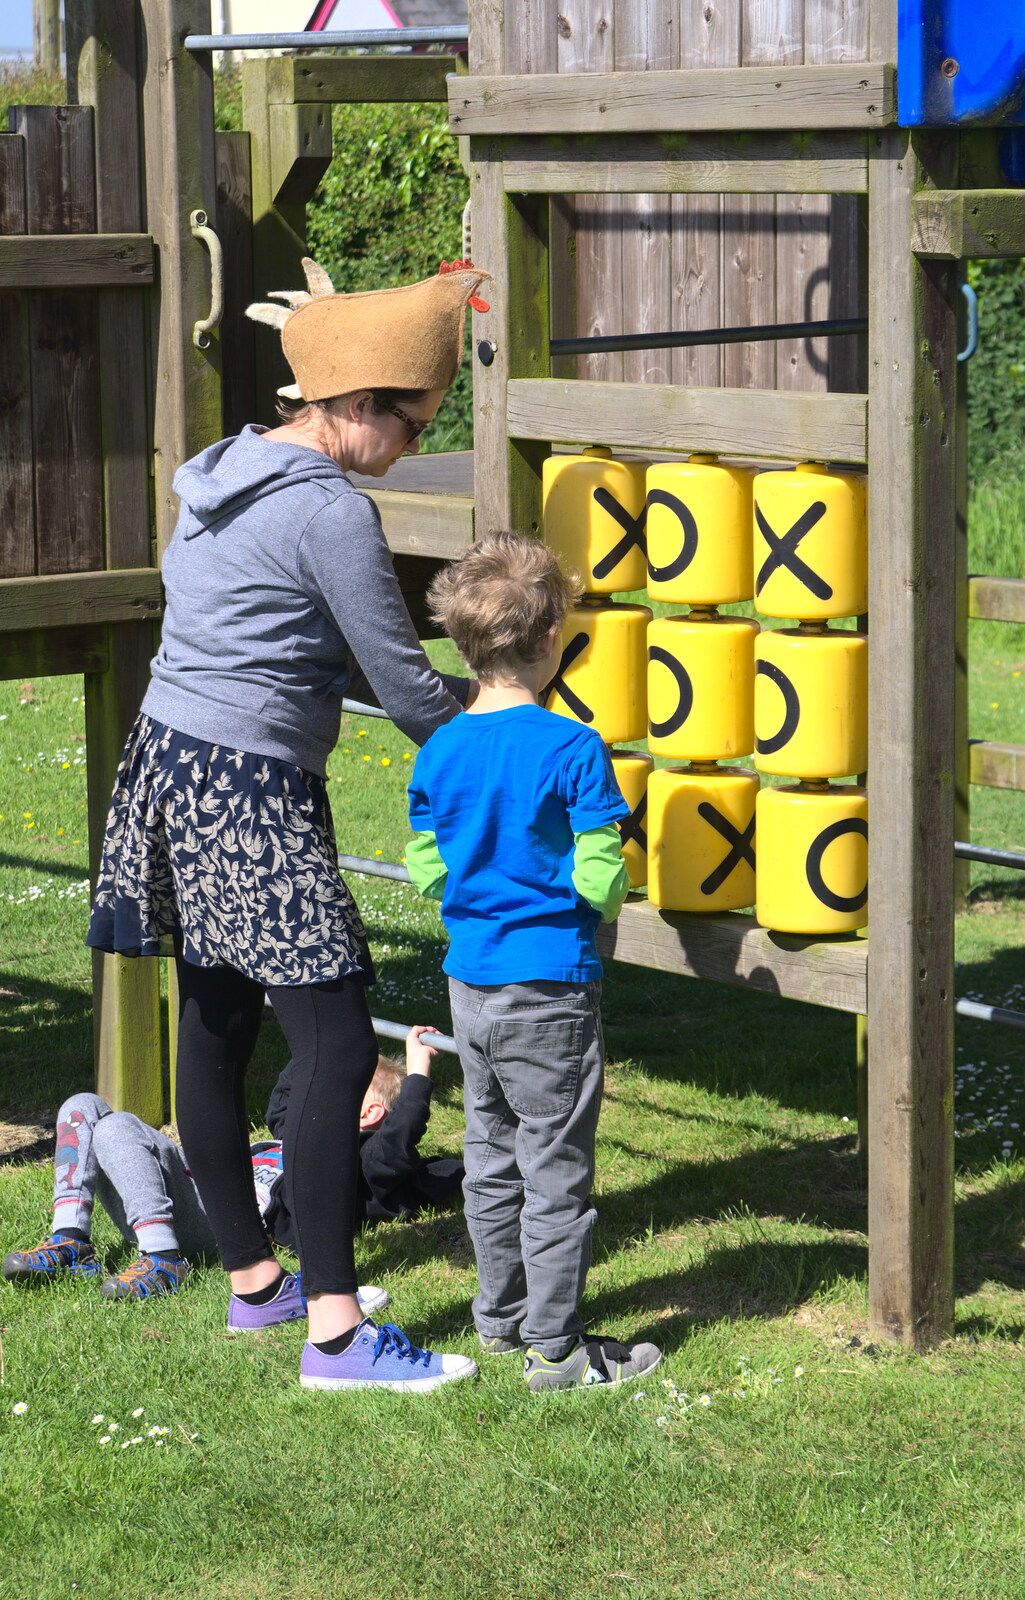 Isobel and Fred play noughts and crosses from Spreyton to Stonehenge, Salisbury Plain, Wiltshire - 31st May 2016